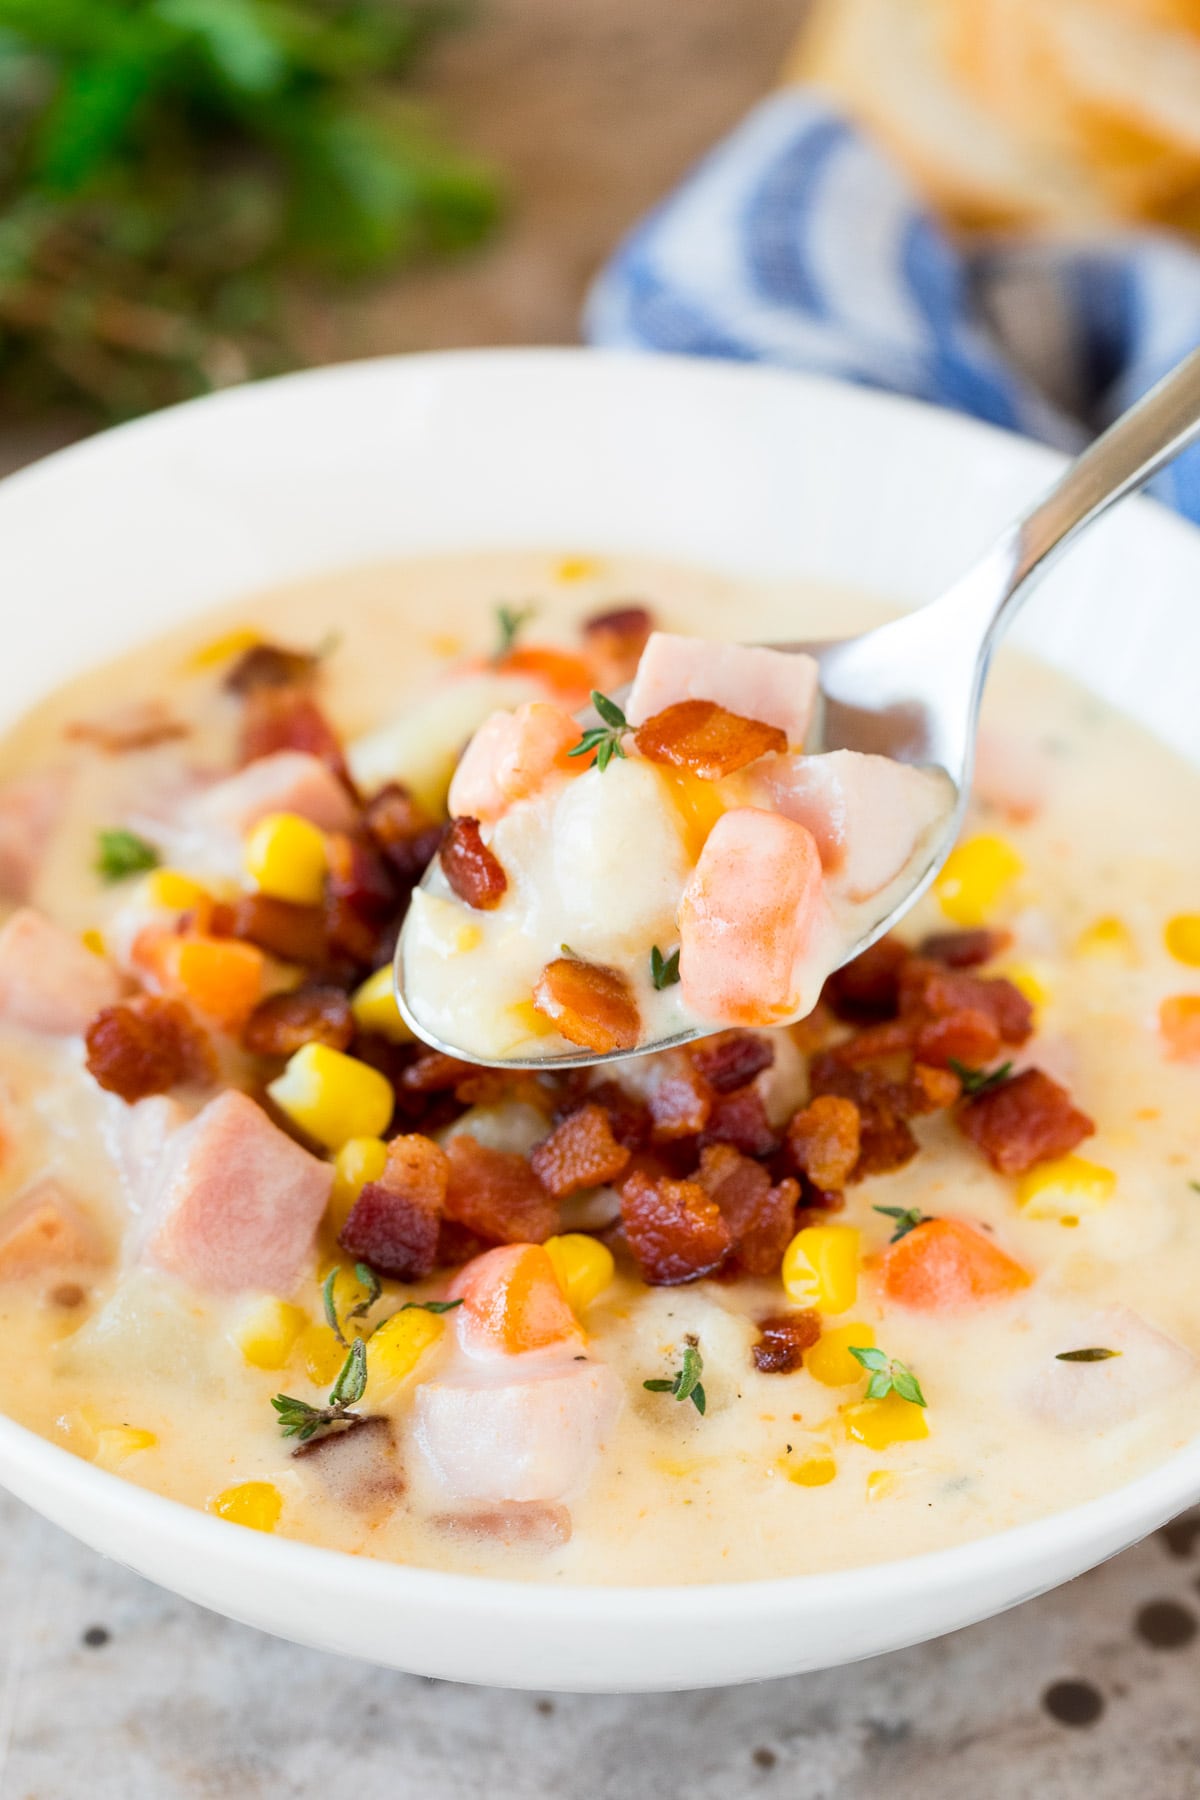 A spoon serving a portion of ham and corn chowder.